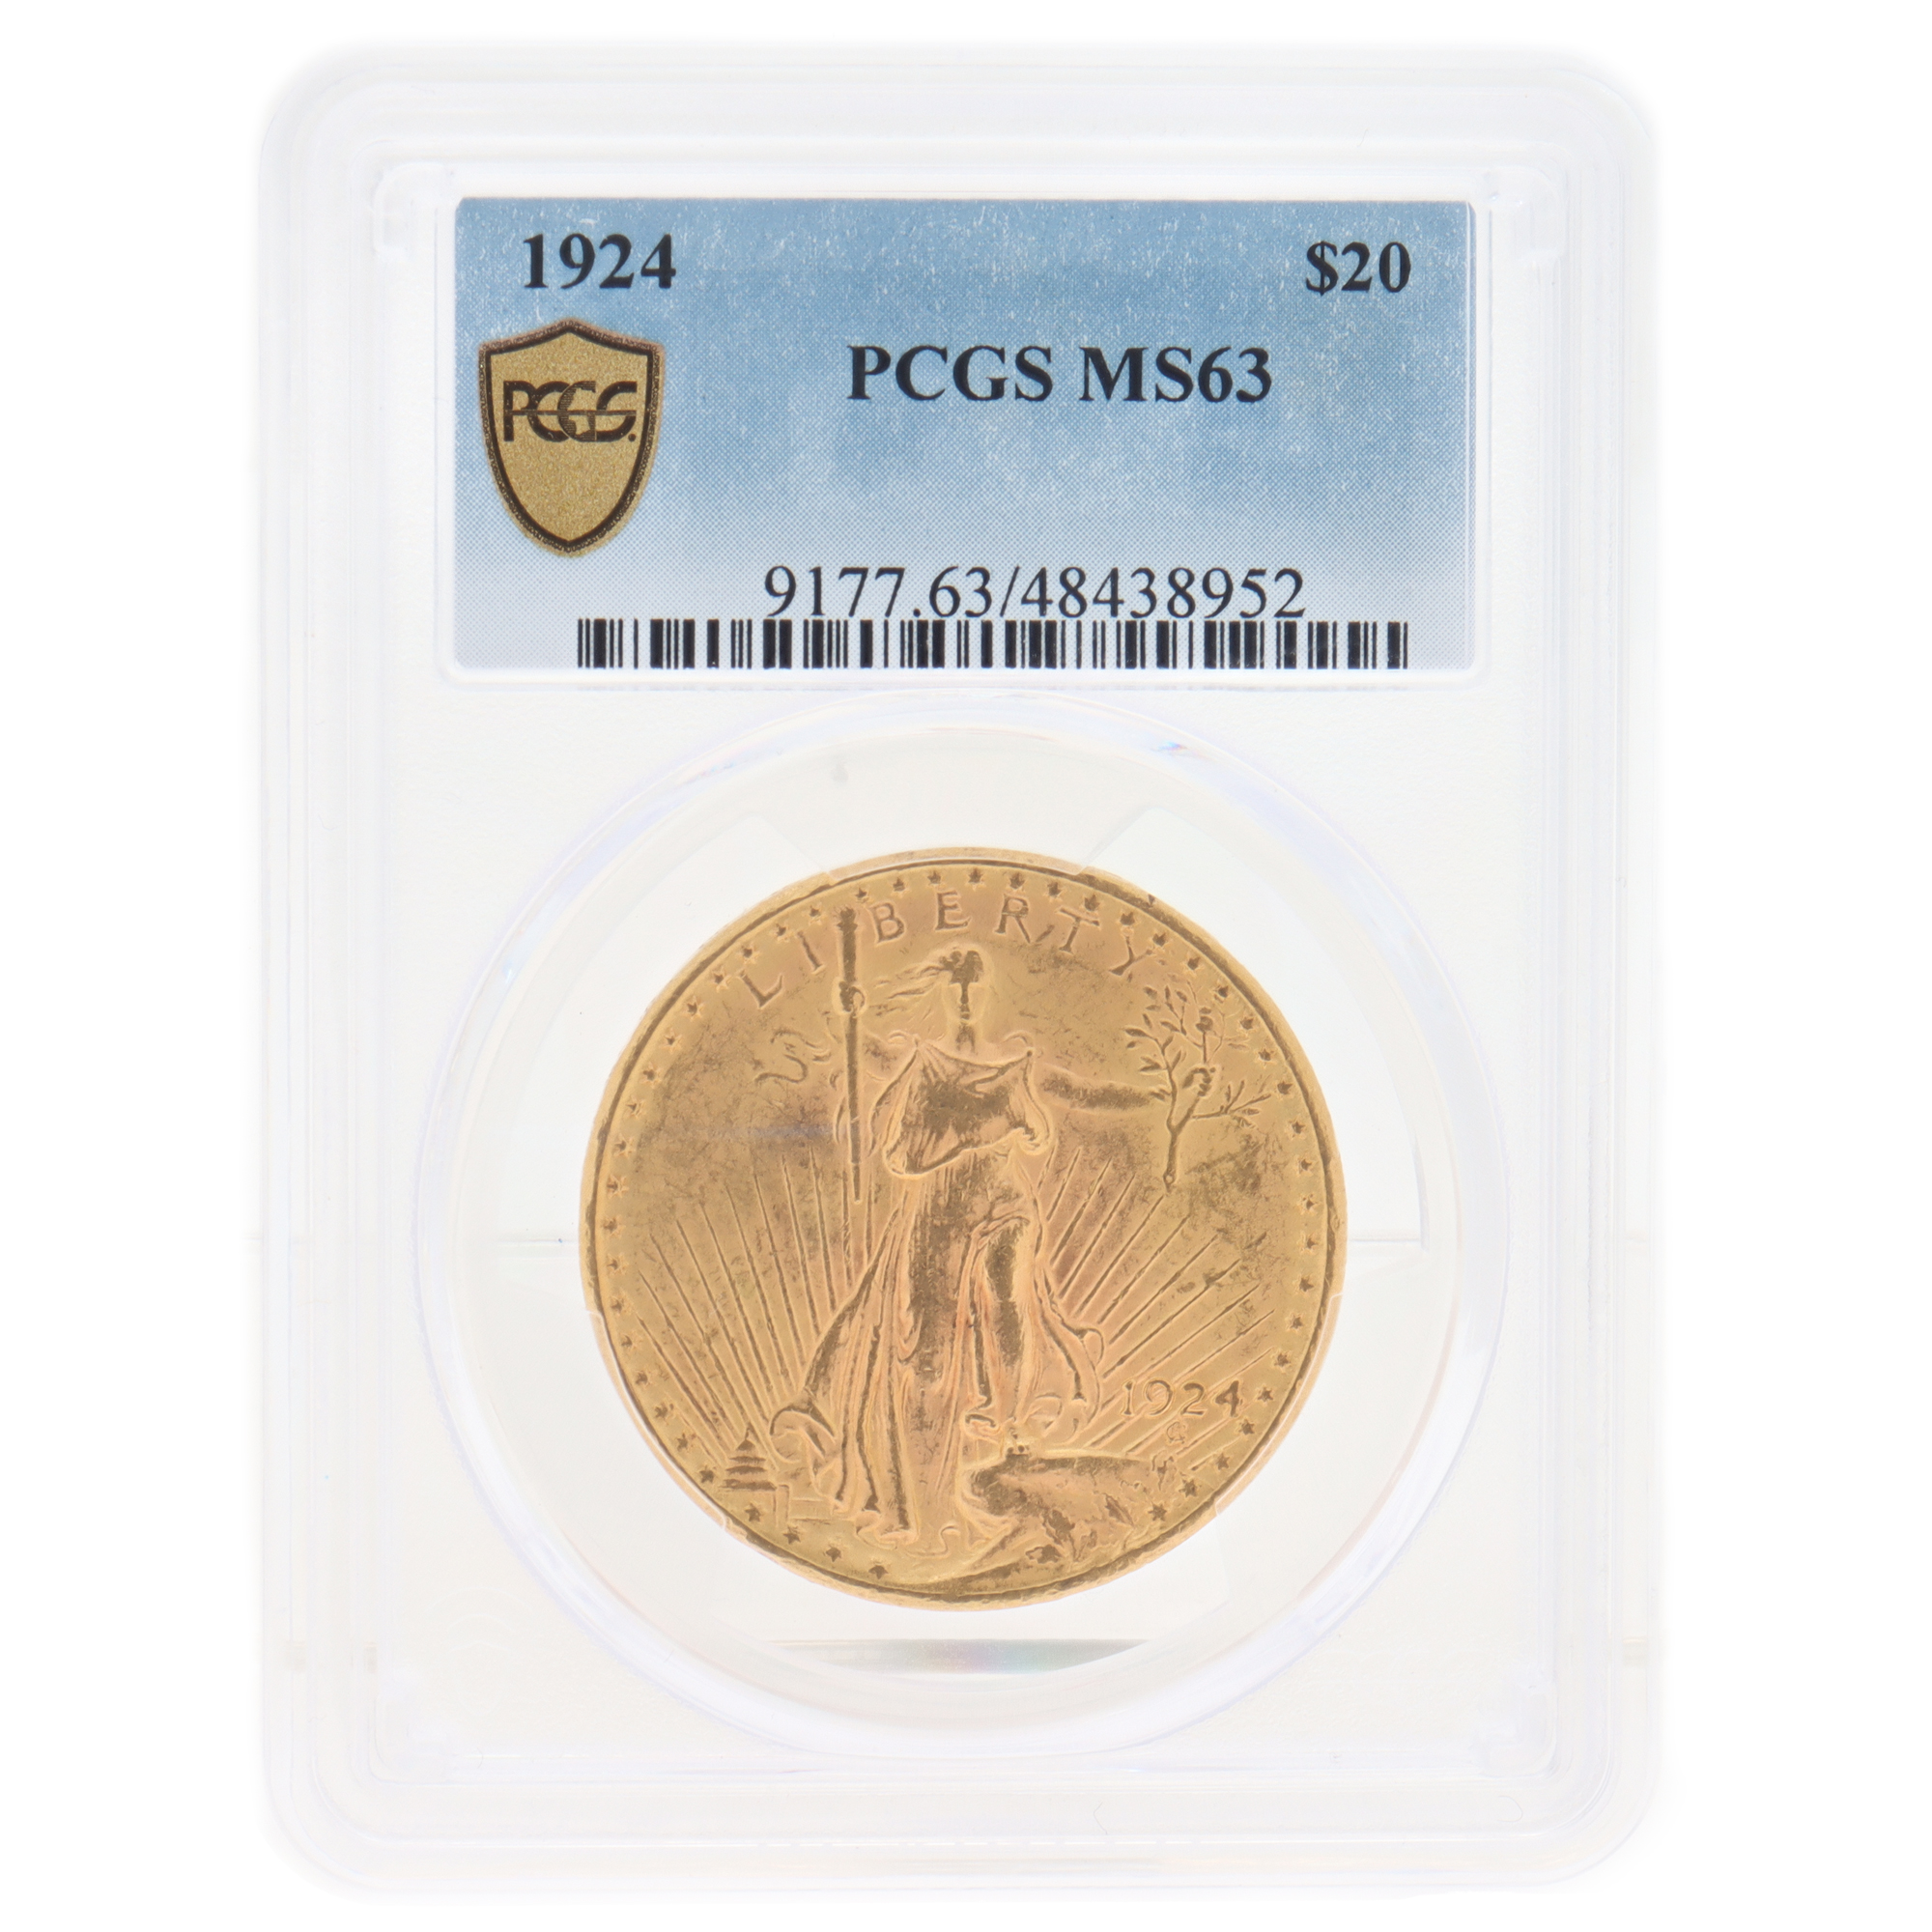 $20 Gold St. Gaudens Coin from 1924. Uncirculated PCGS grading of MS63